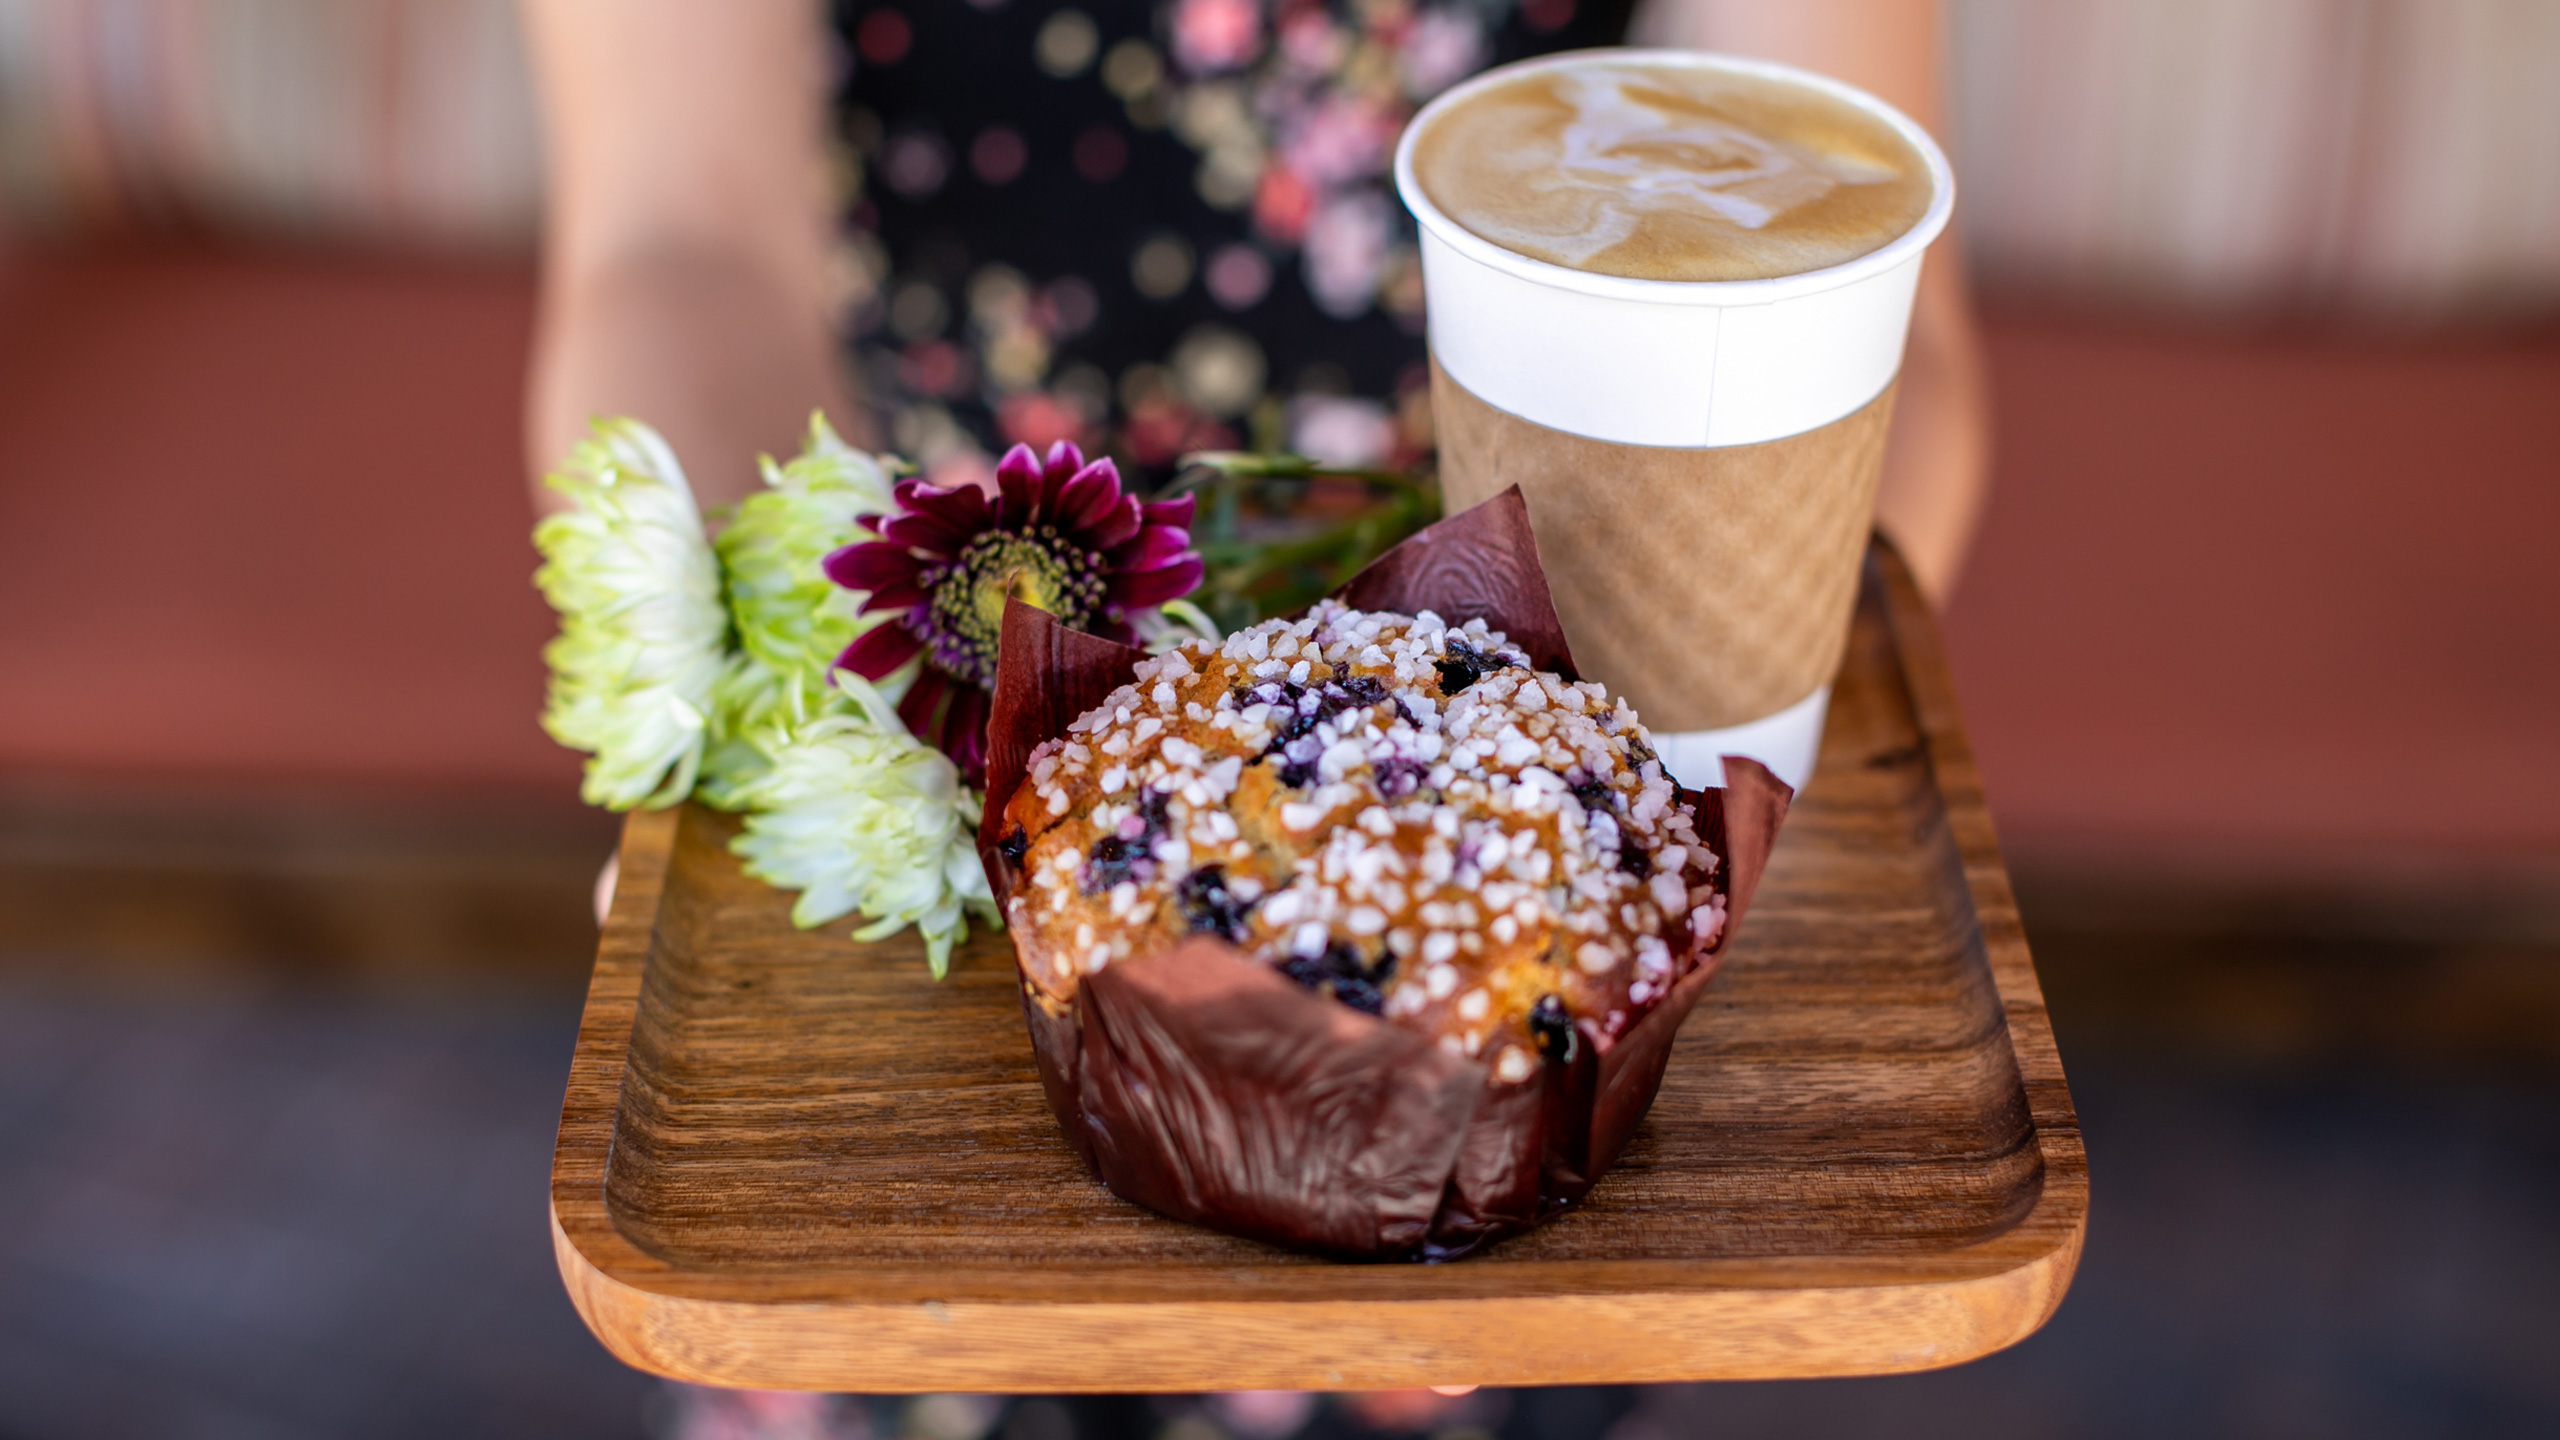 wooden tray with flowers, large blueberry muffin and coffee